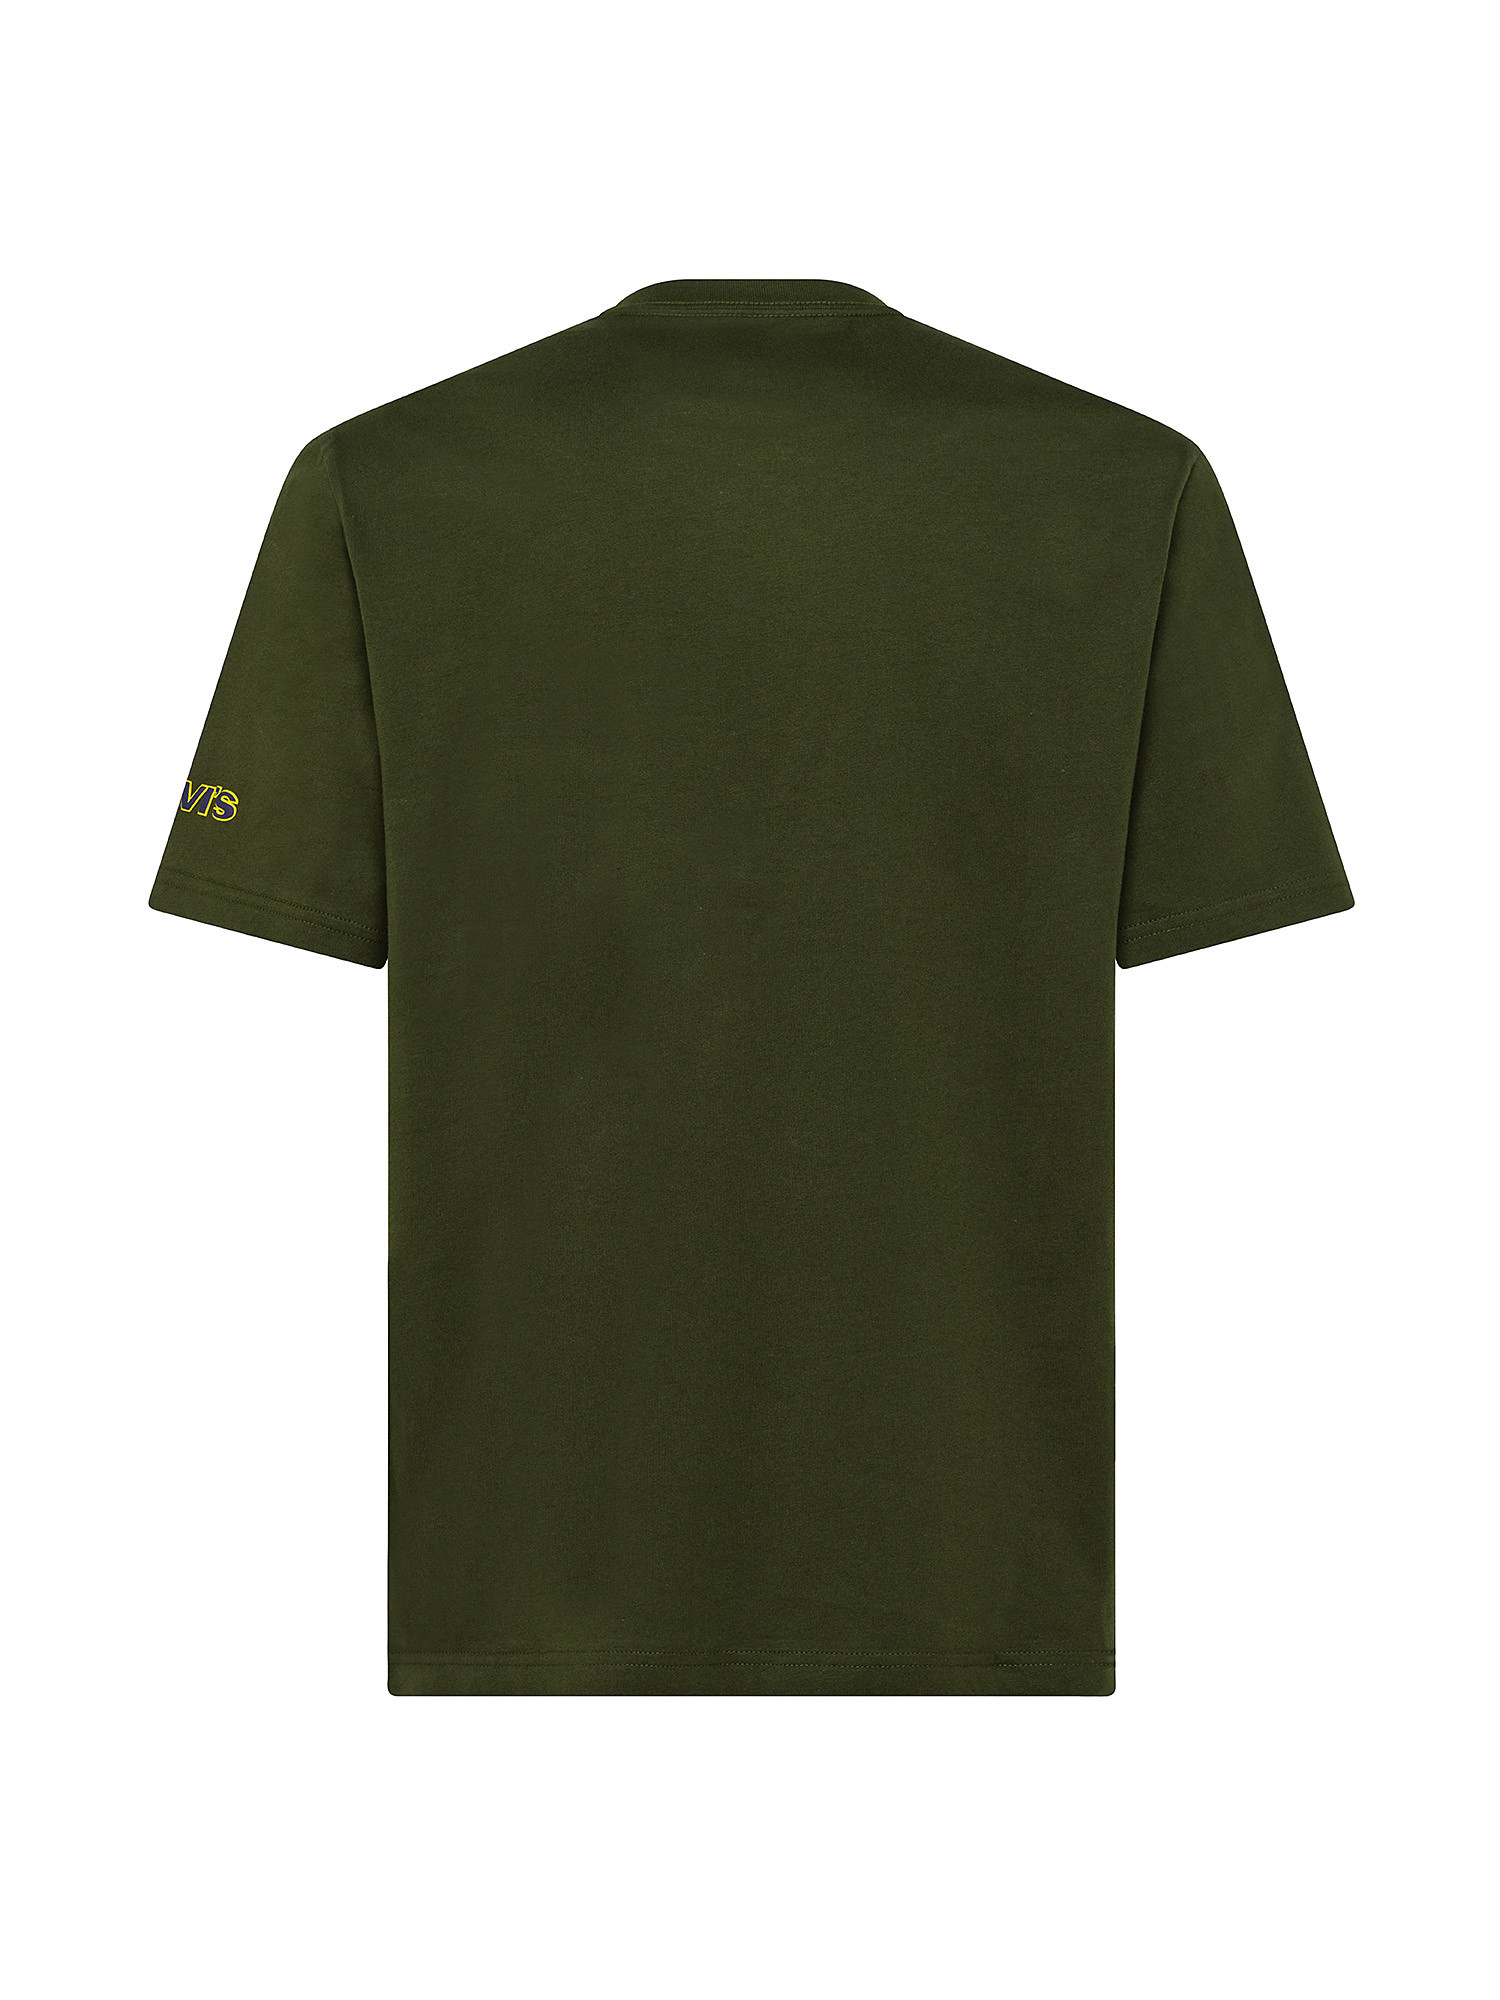 Graphic Tee, Verde, large